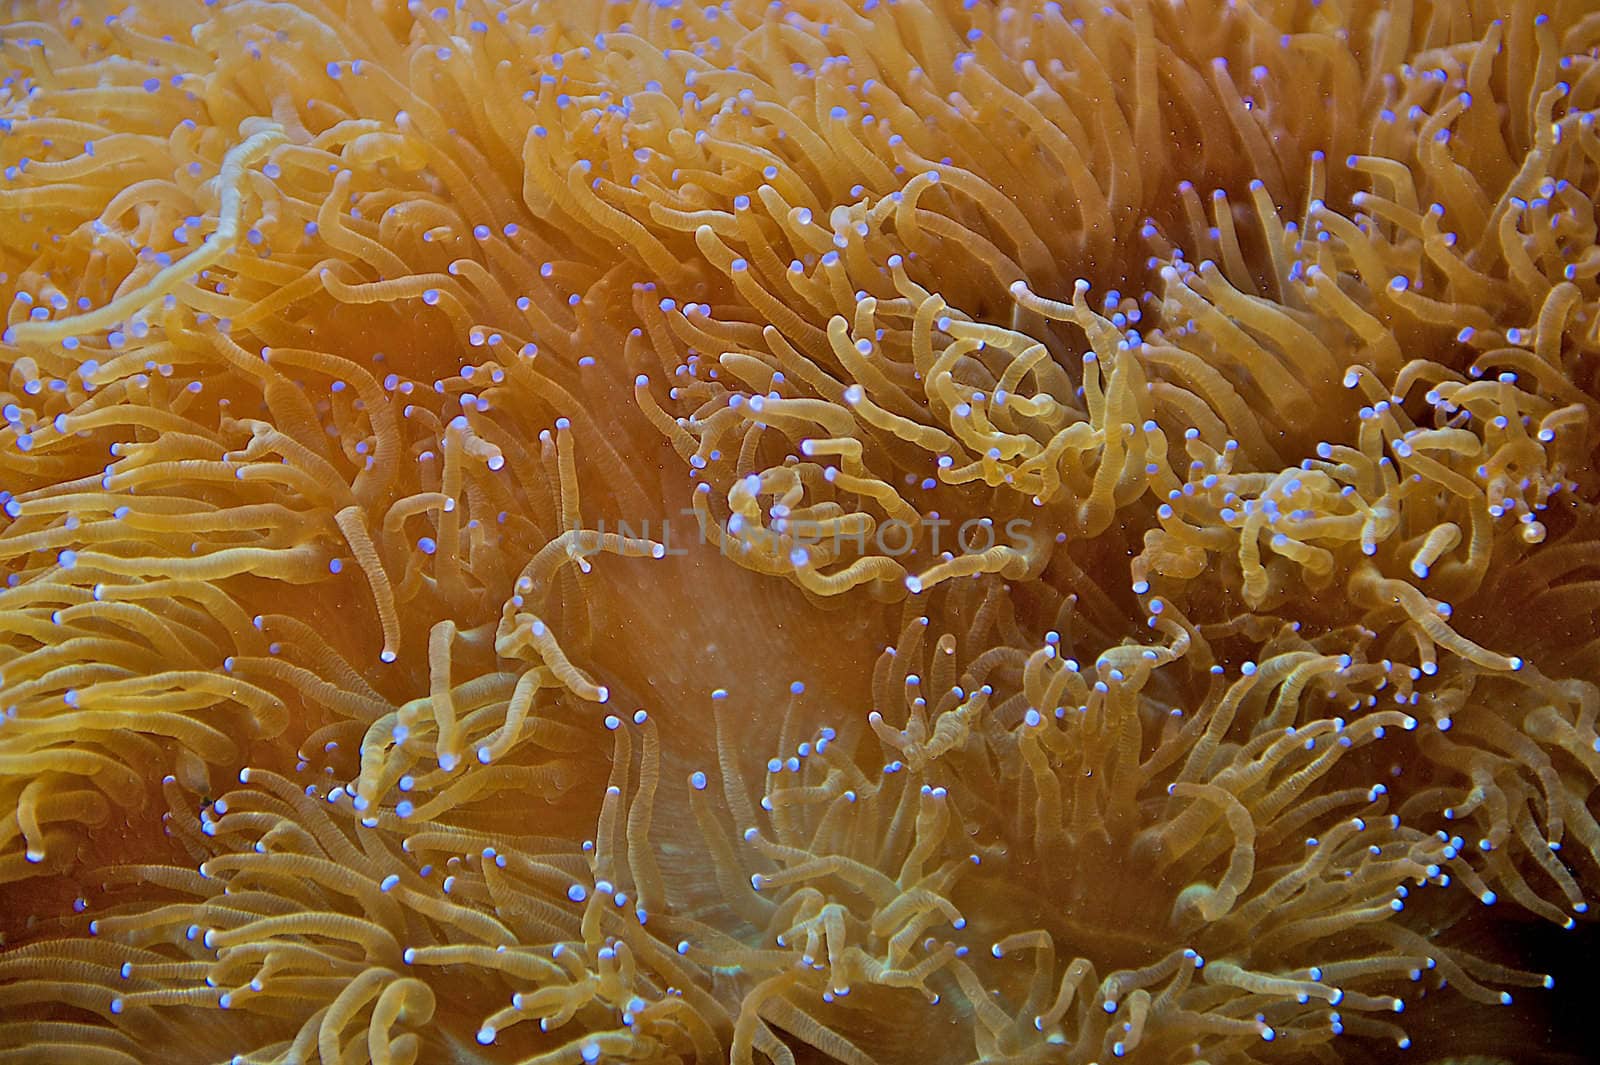 Marine coral tentacles wave in the water.